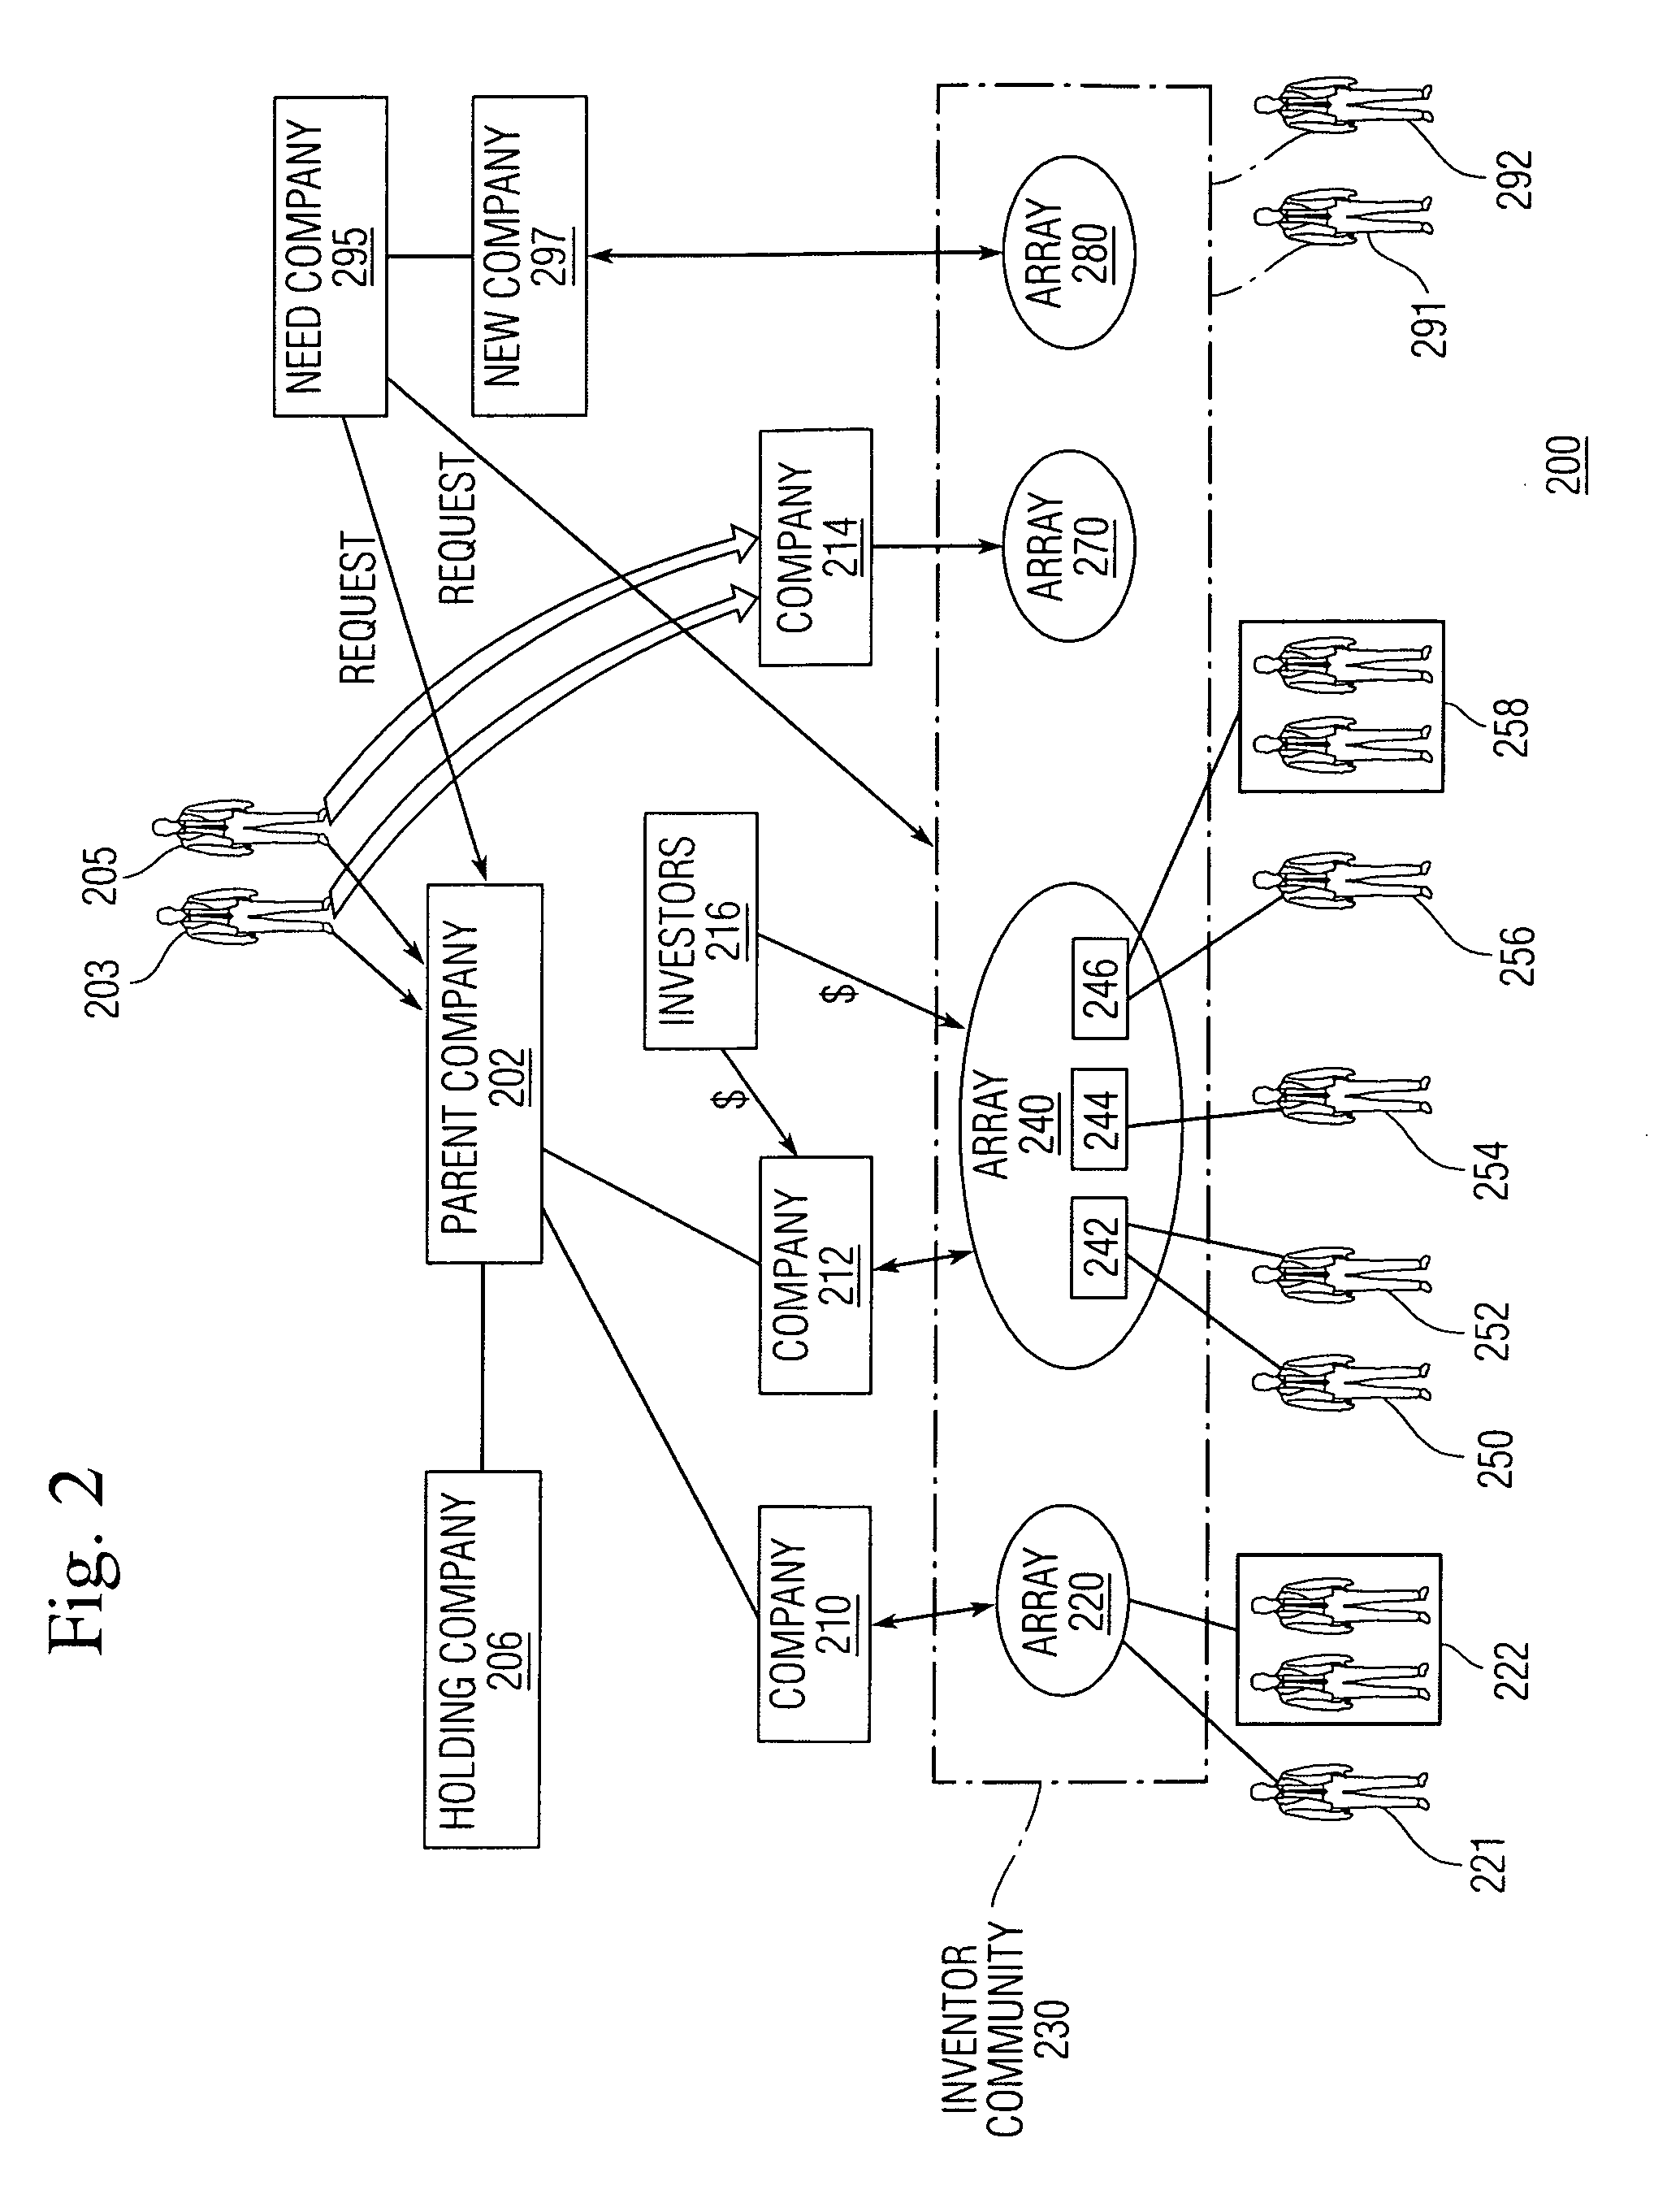 System and method for an intellectual property collaboration network